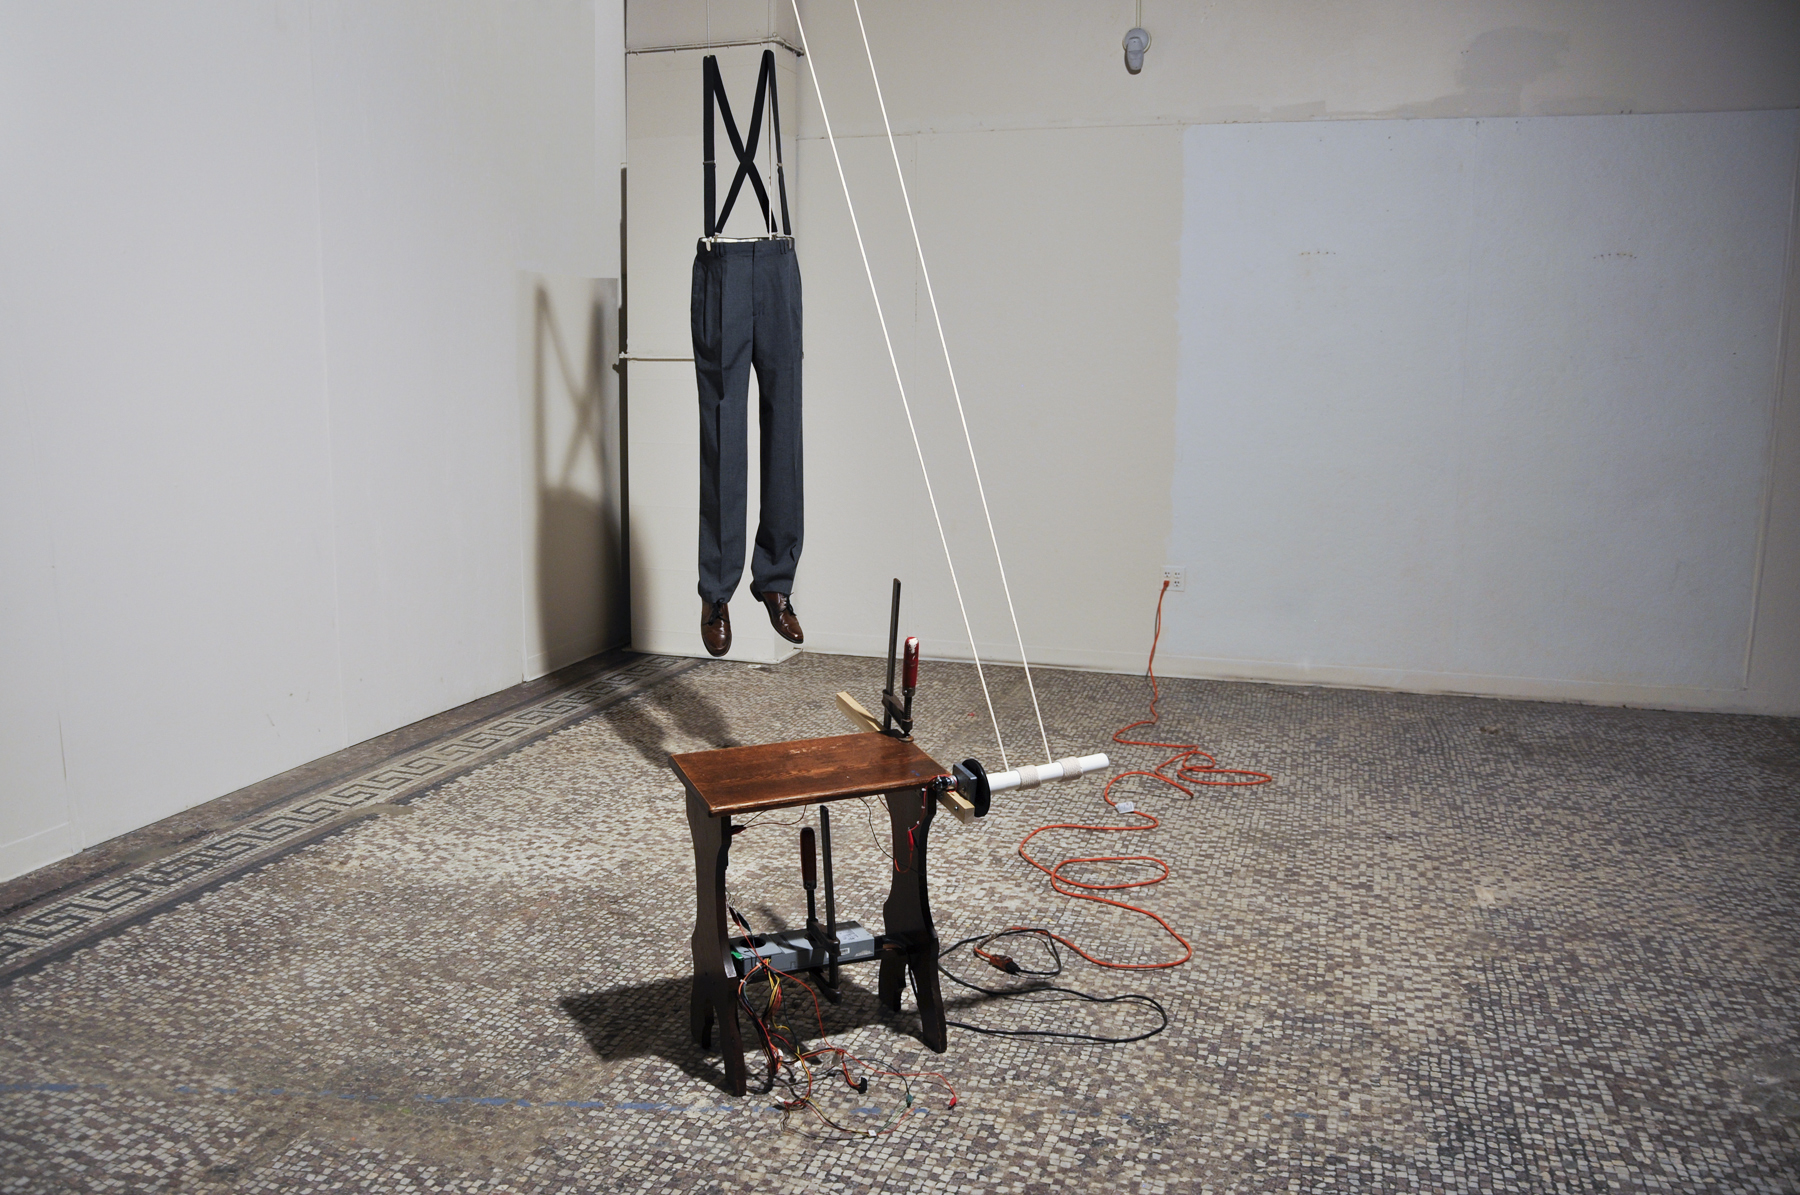   2013 , trousers, desk, rope, shoes 